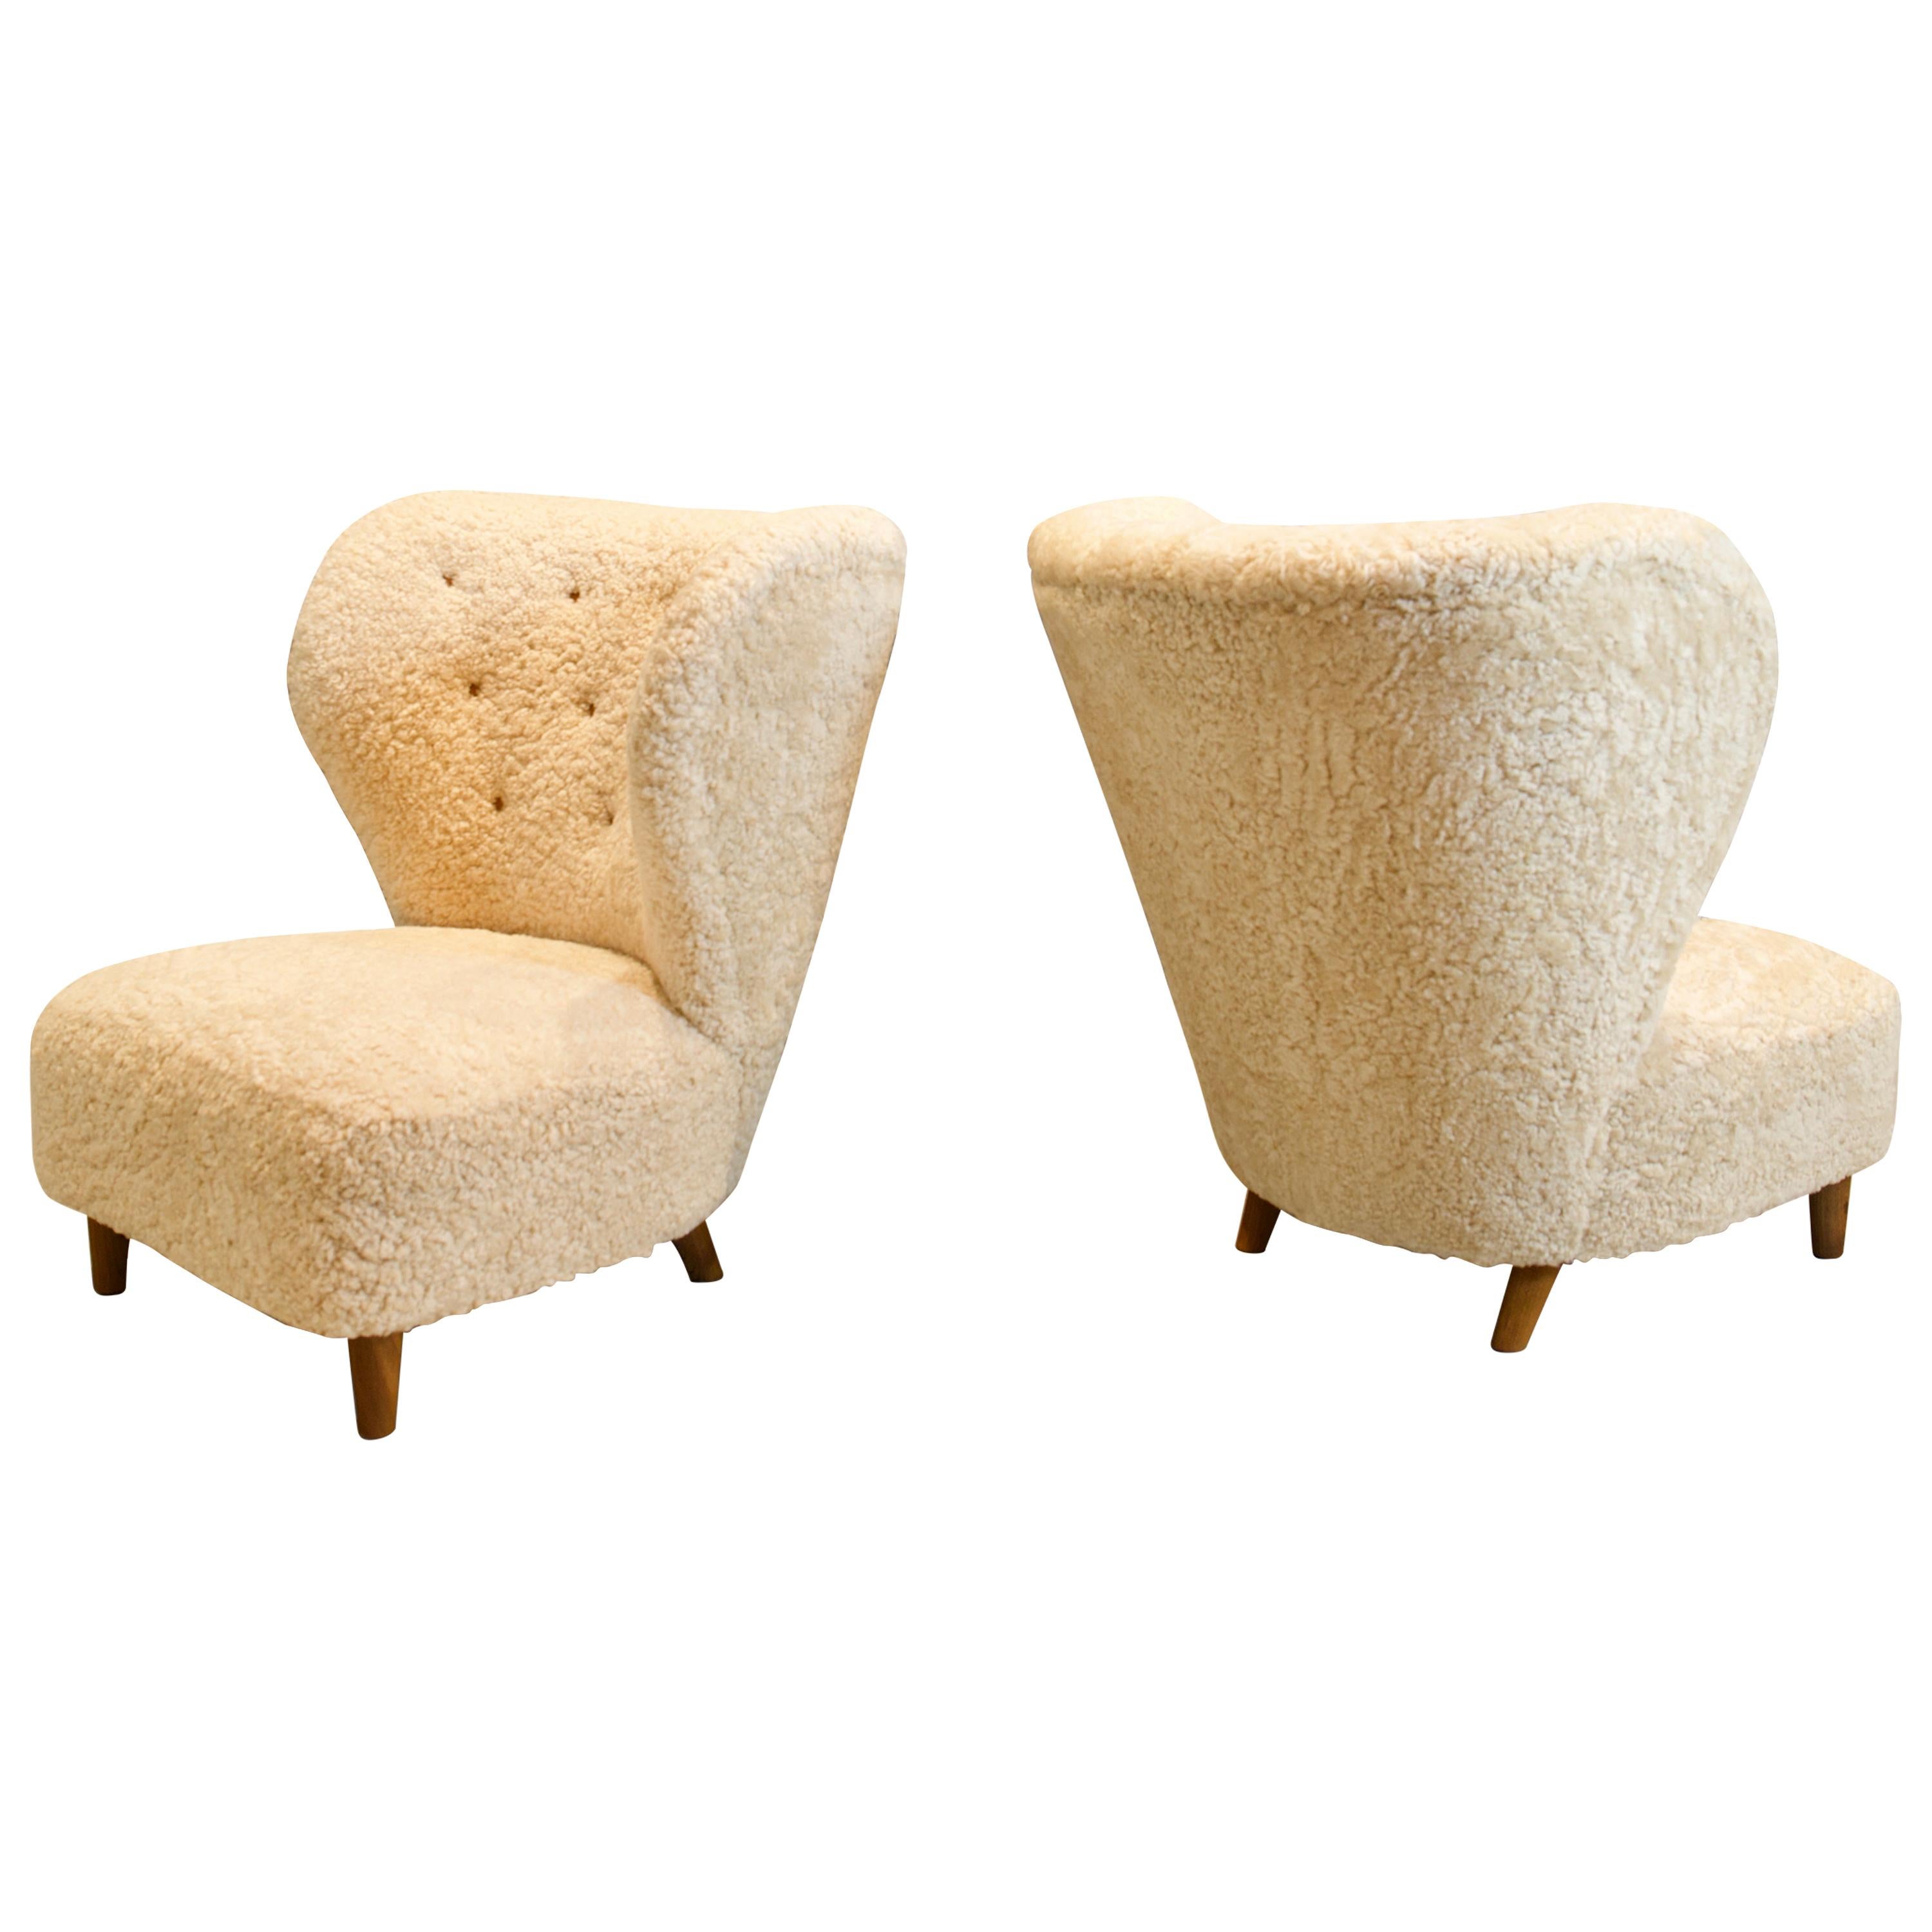 Pair of Scandinavian Low Chairs in Shearling, 1940s